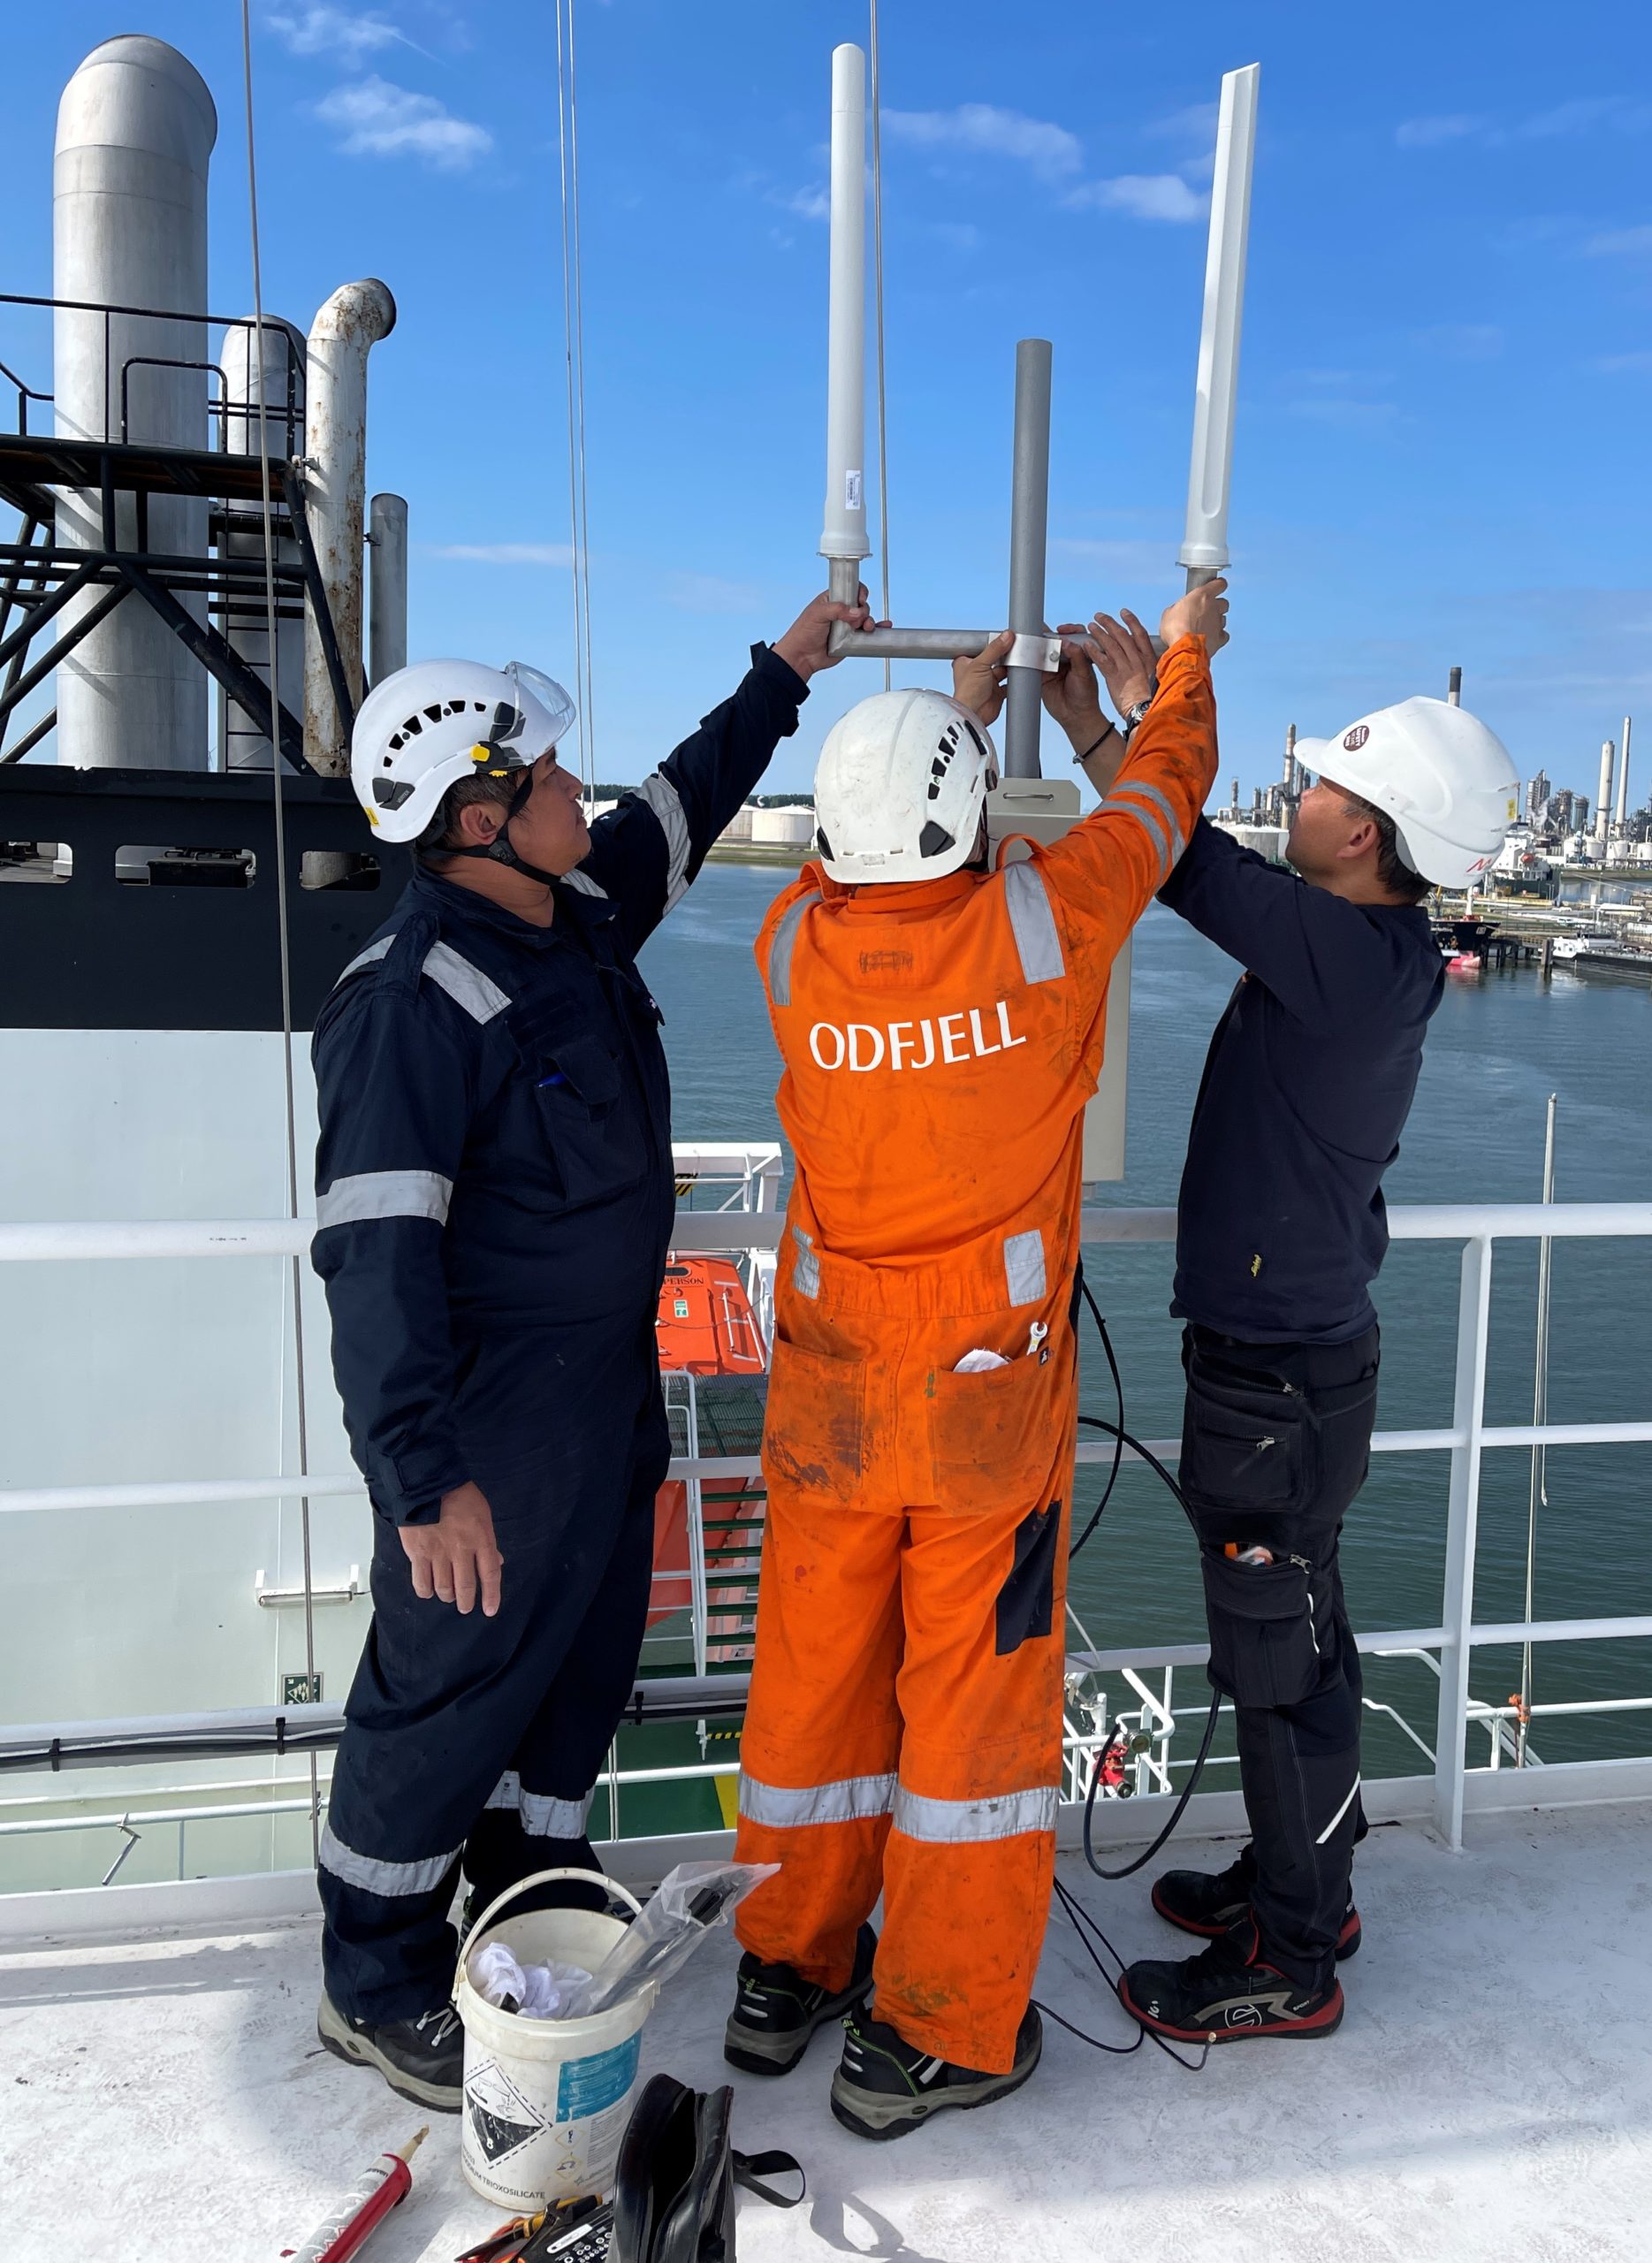 Marlink deploys smart network technology with hybrid connectivity to drive Odfjell’s cloud-based digital strategy